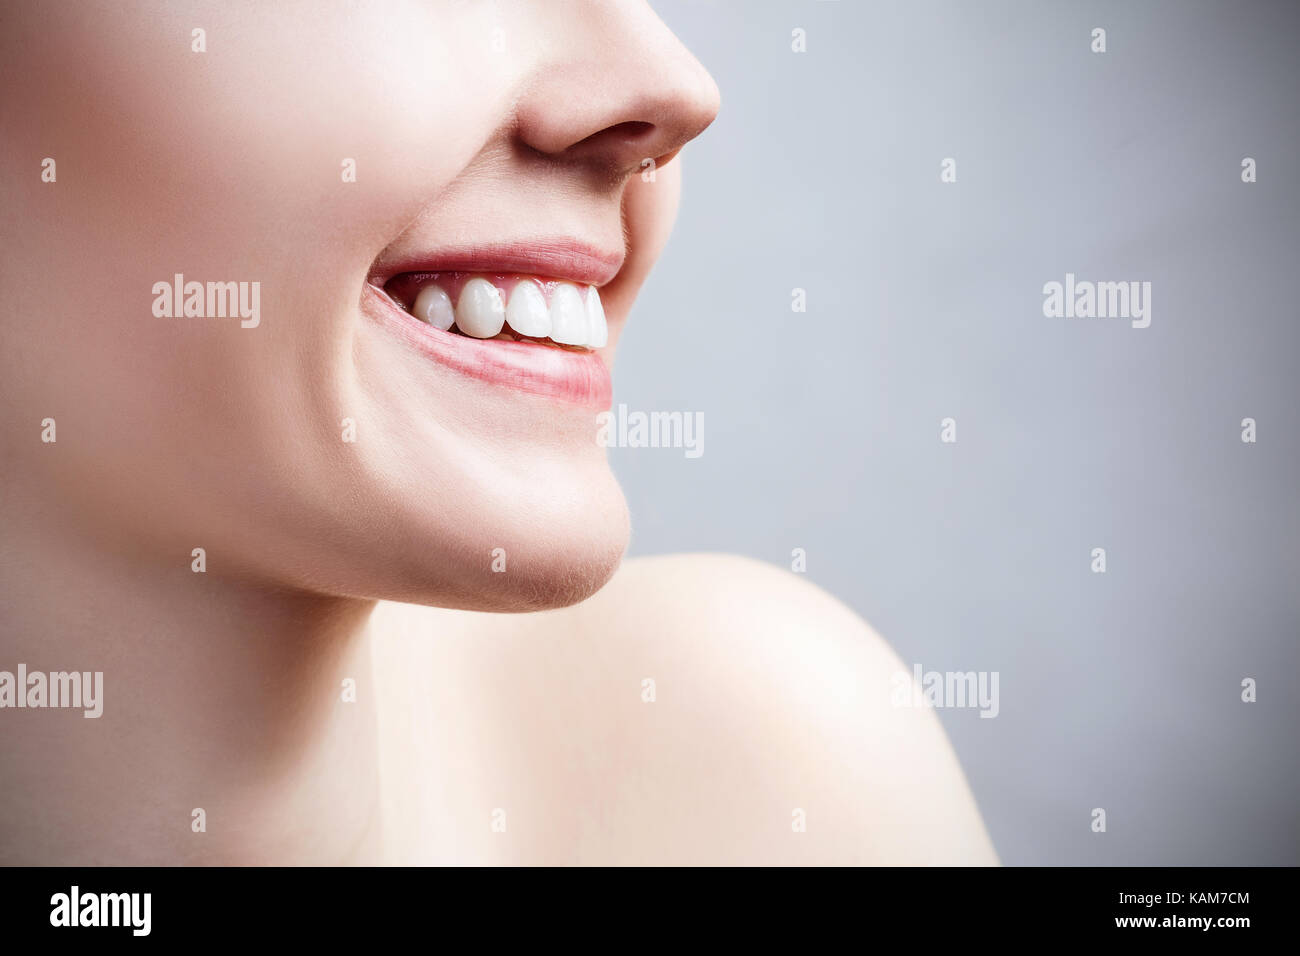 Face of young woman with healthy white teeth. Stock Photo